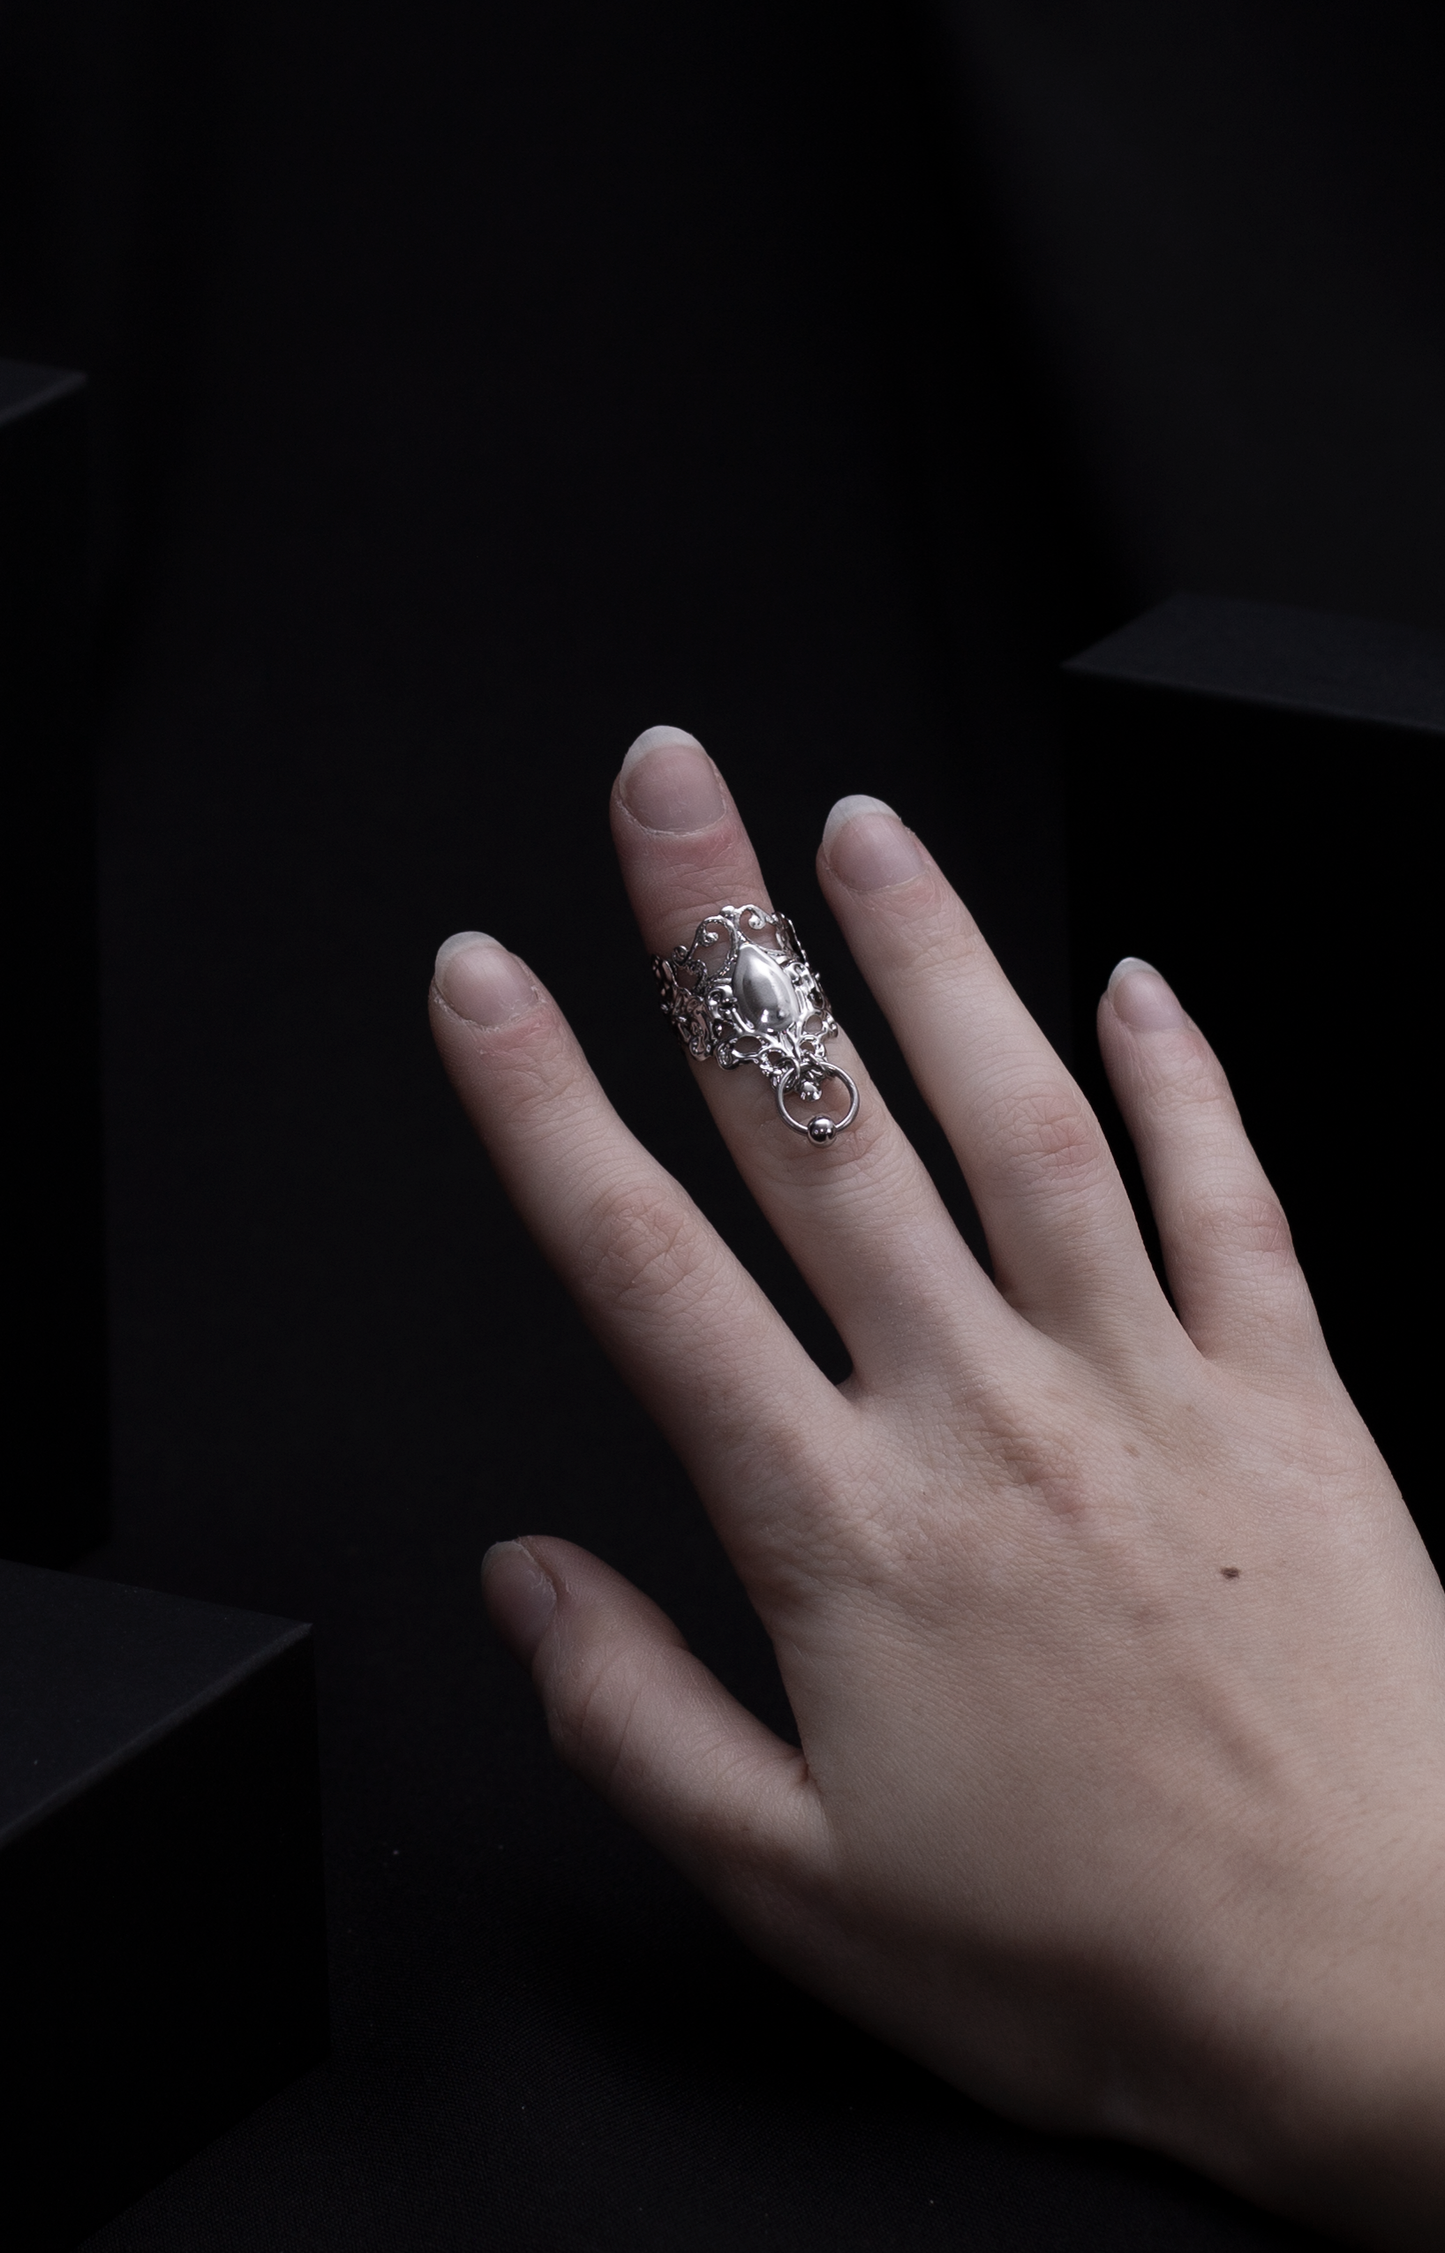 An alluring Myril Jewels midi ring with neo-gothic charm, featuring delicate filigree and a bold, tear-shaped centerpiece. Crafted for the dark fashion connoisseur, it's a quintessential accessory for a whimsigoth or witchcore ensemble, perfect for both daily gothic-chic statements and as an audacious festival jewel.